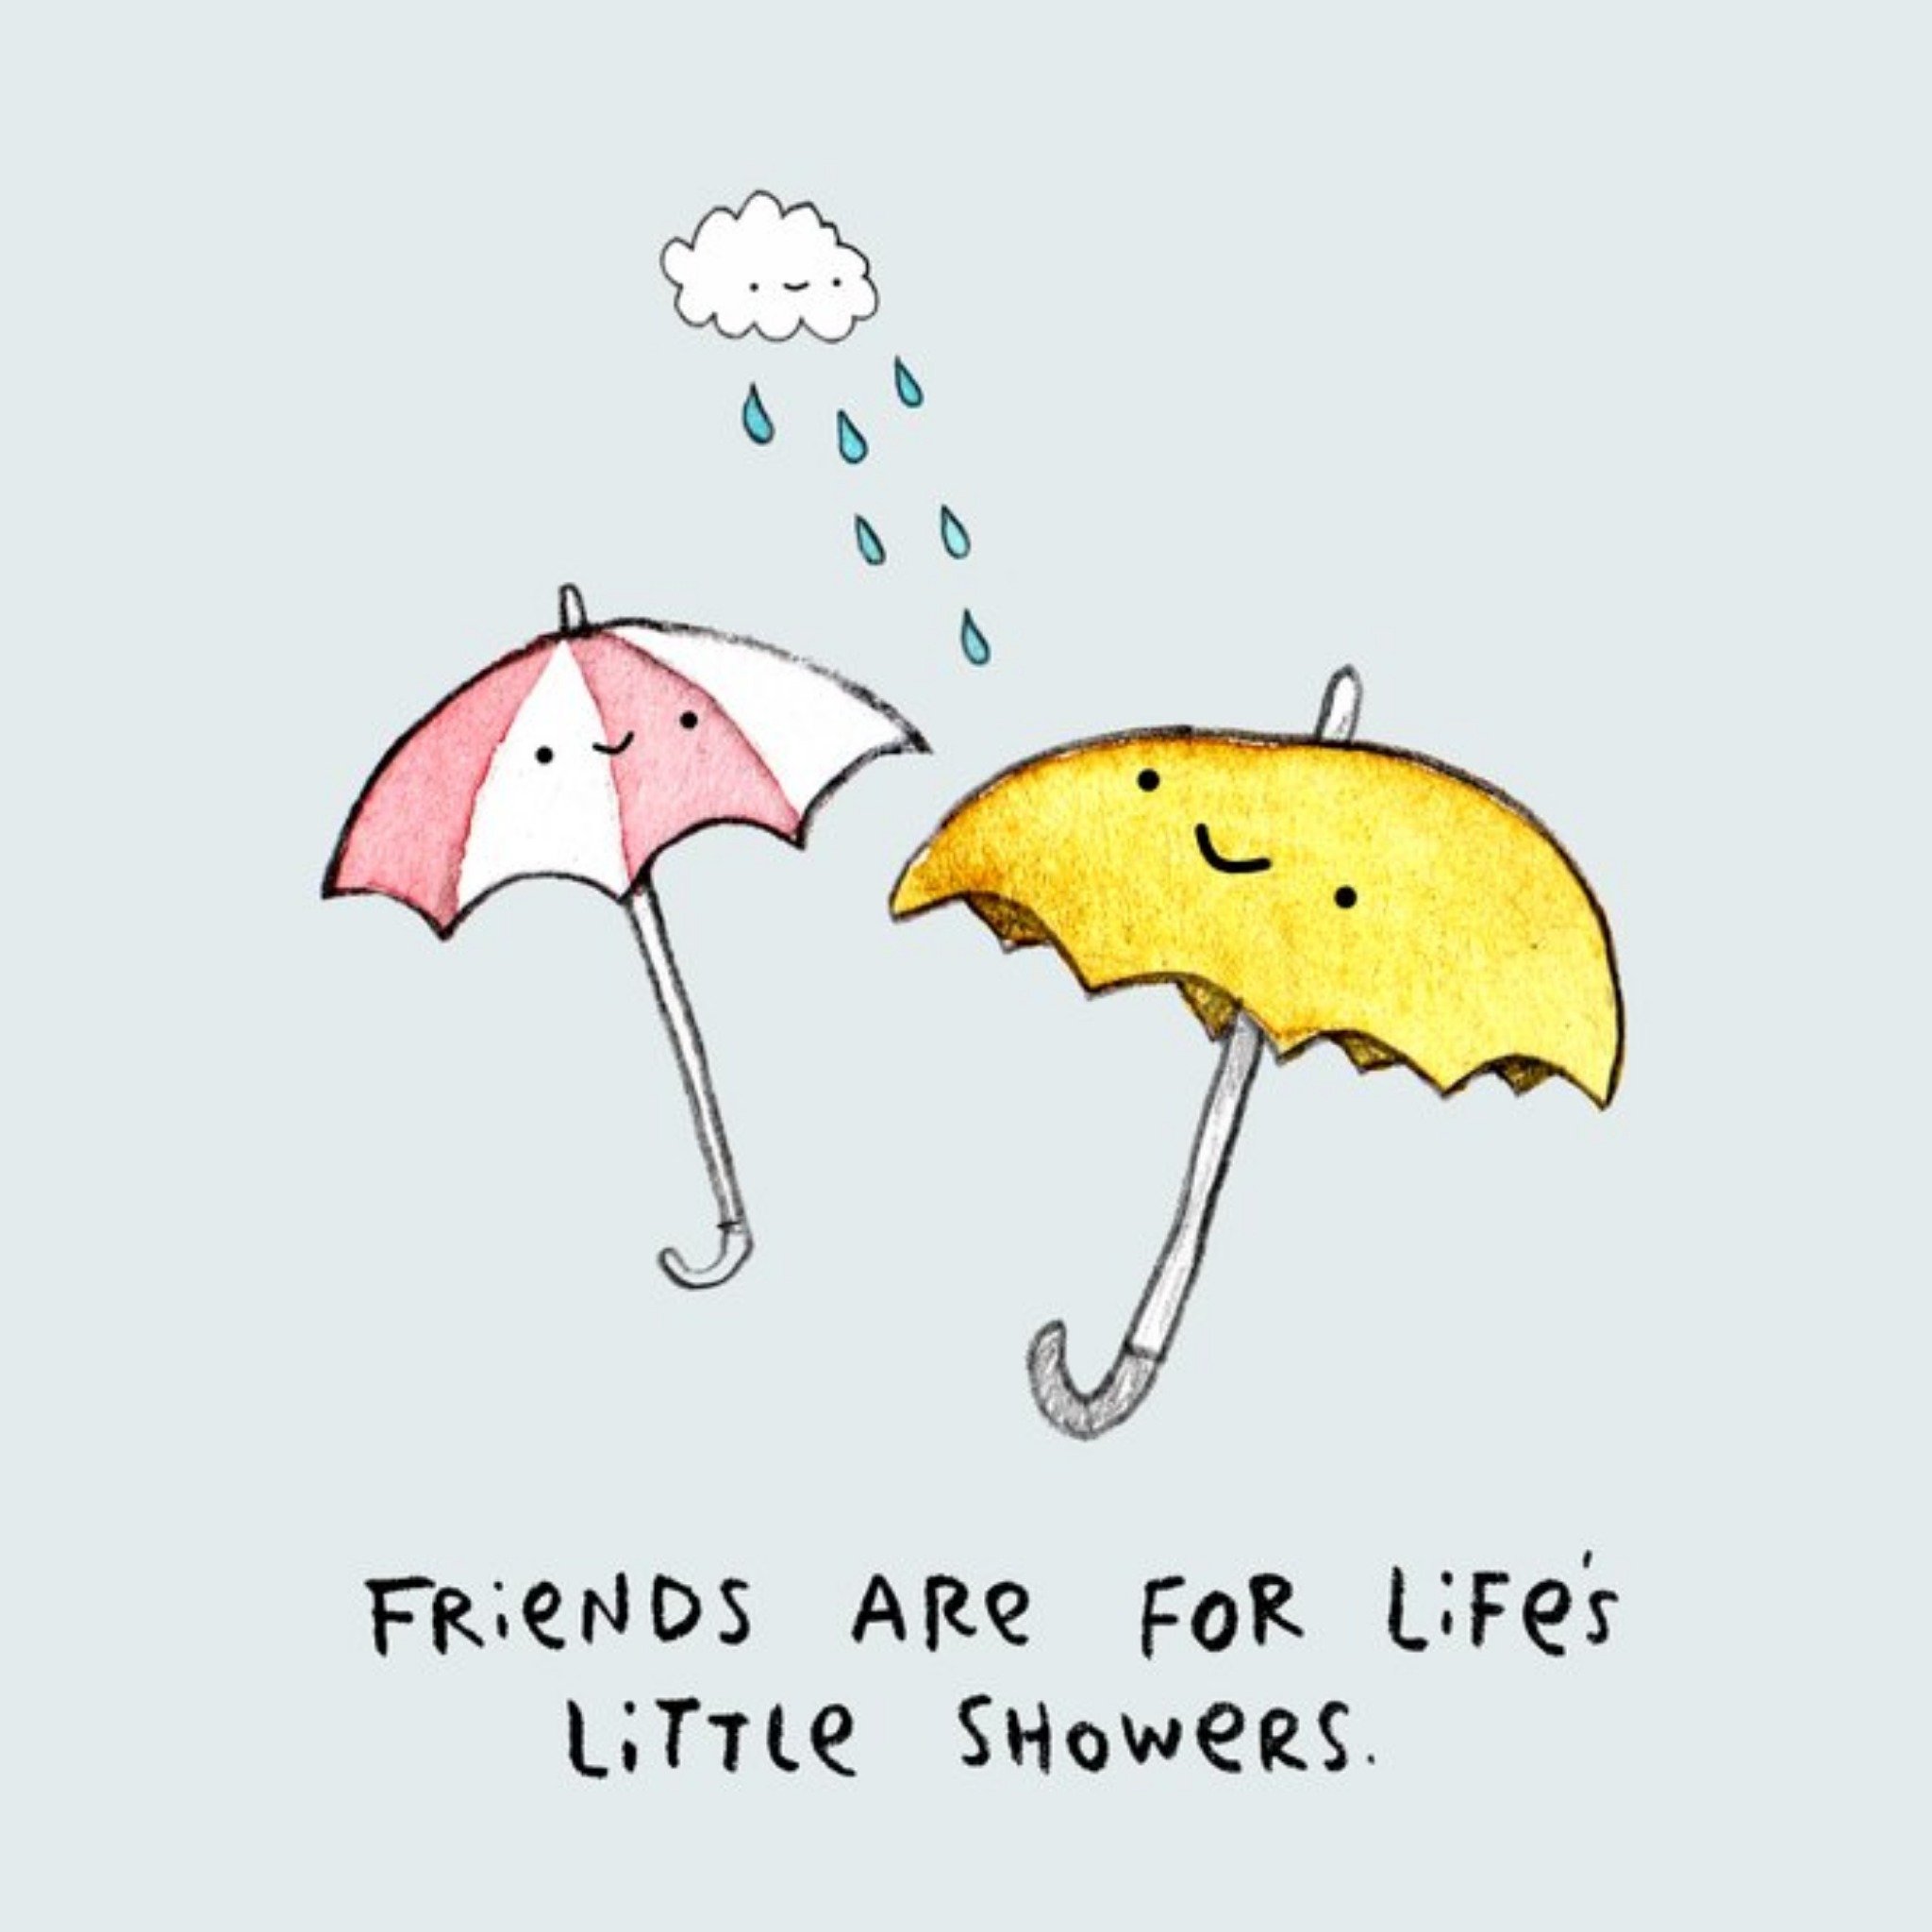 Moonpig Friends Are For Life's Little Showers Personalised Greetings Card, Square